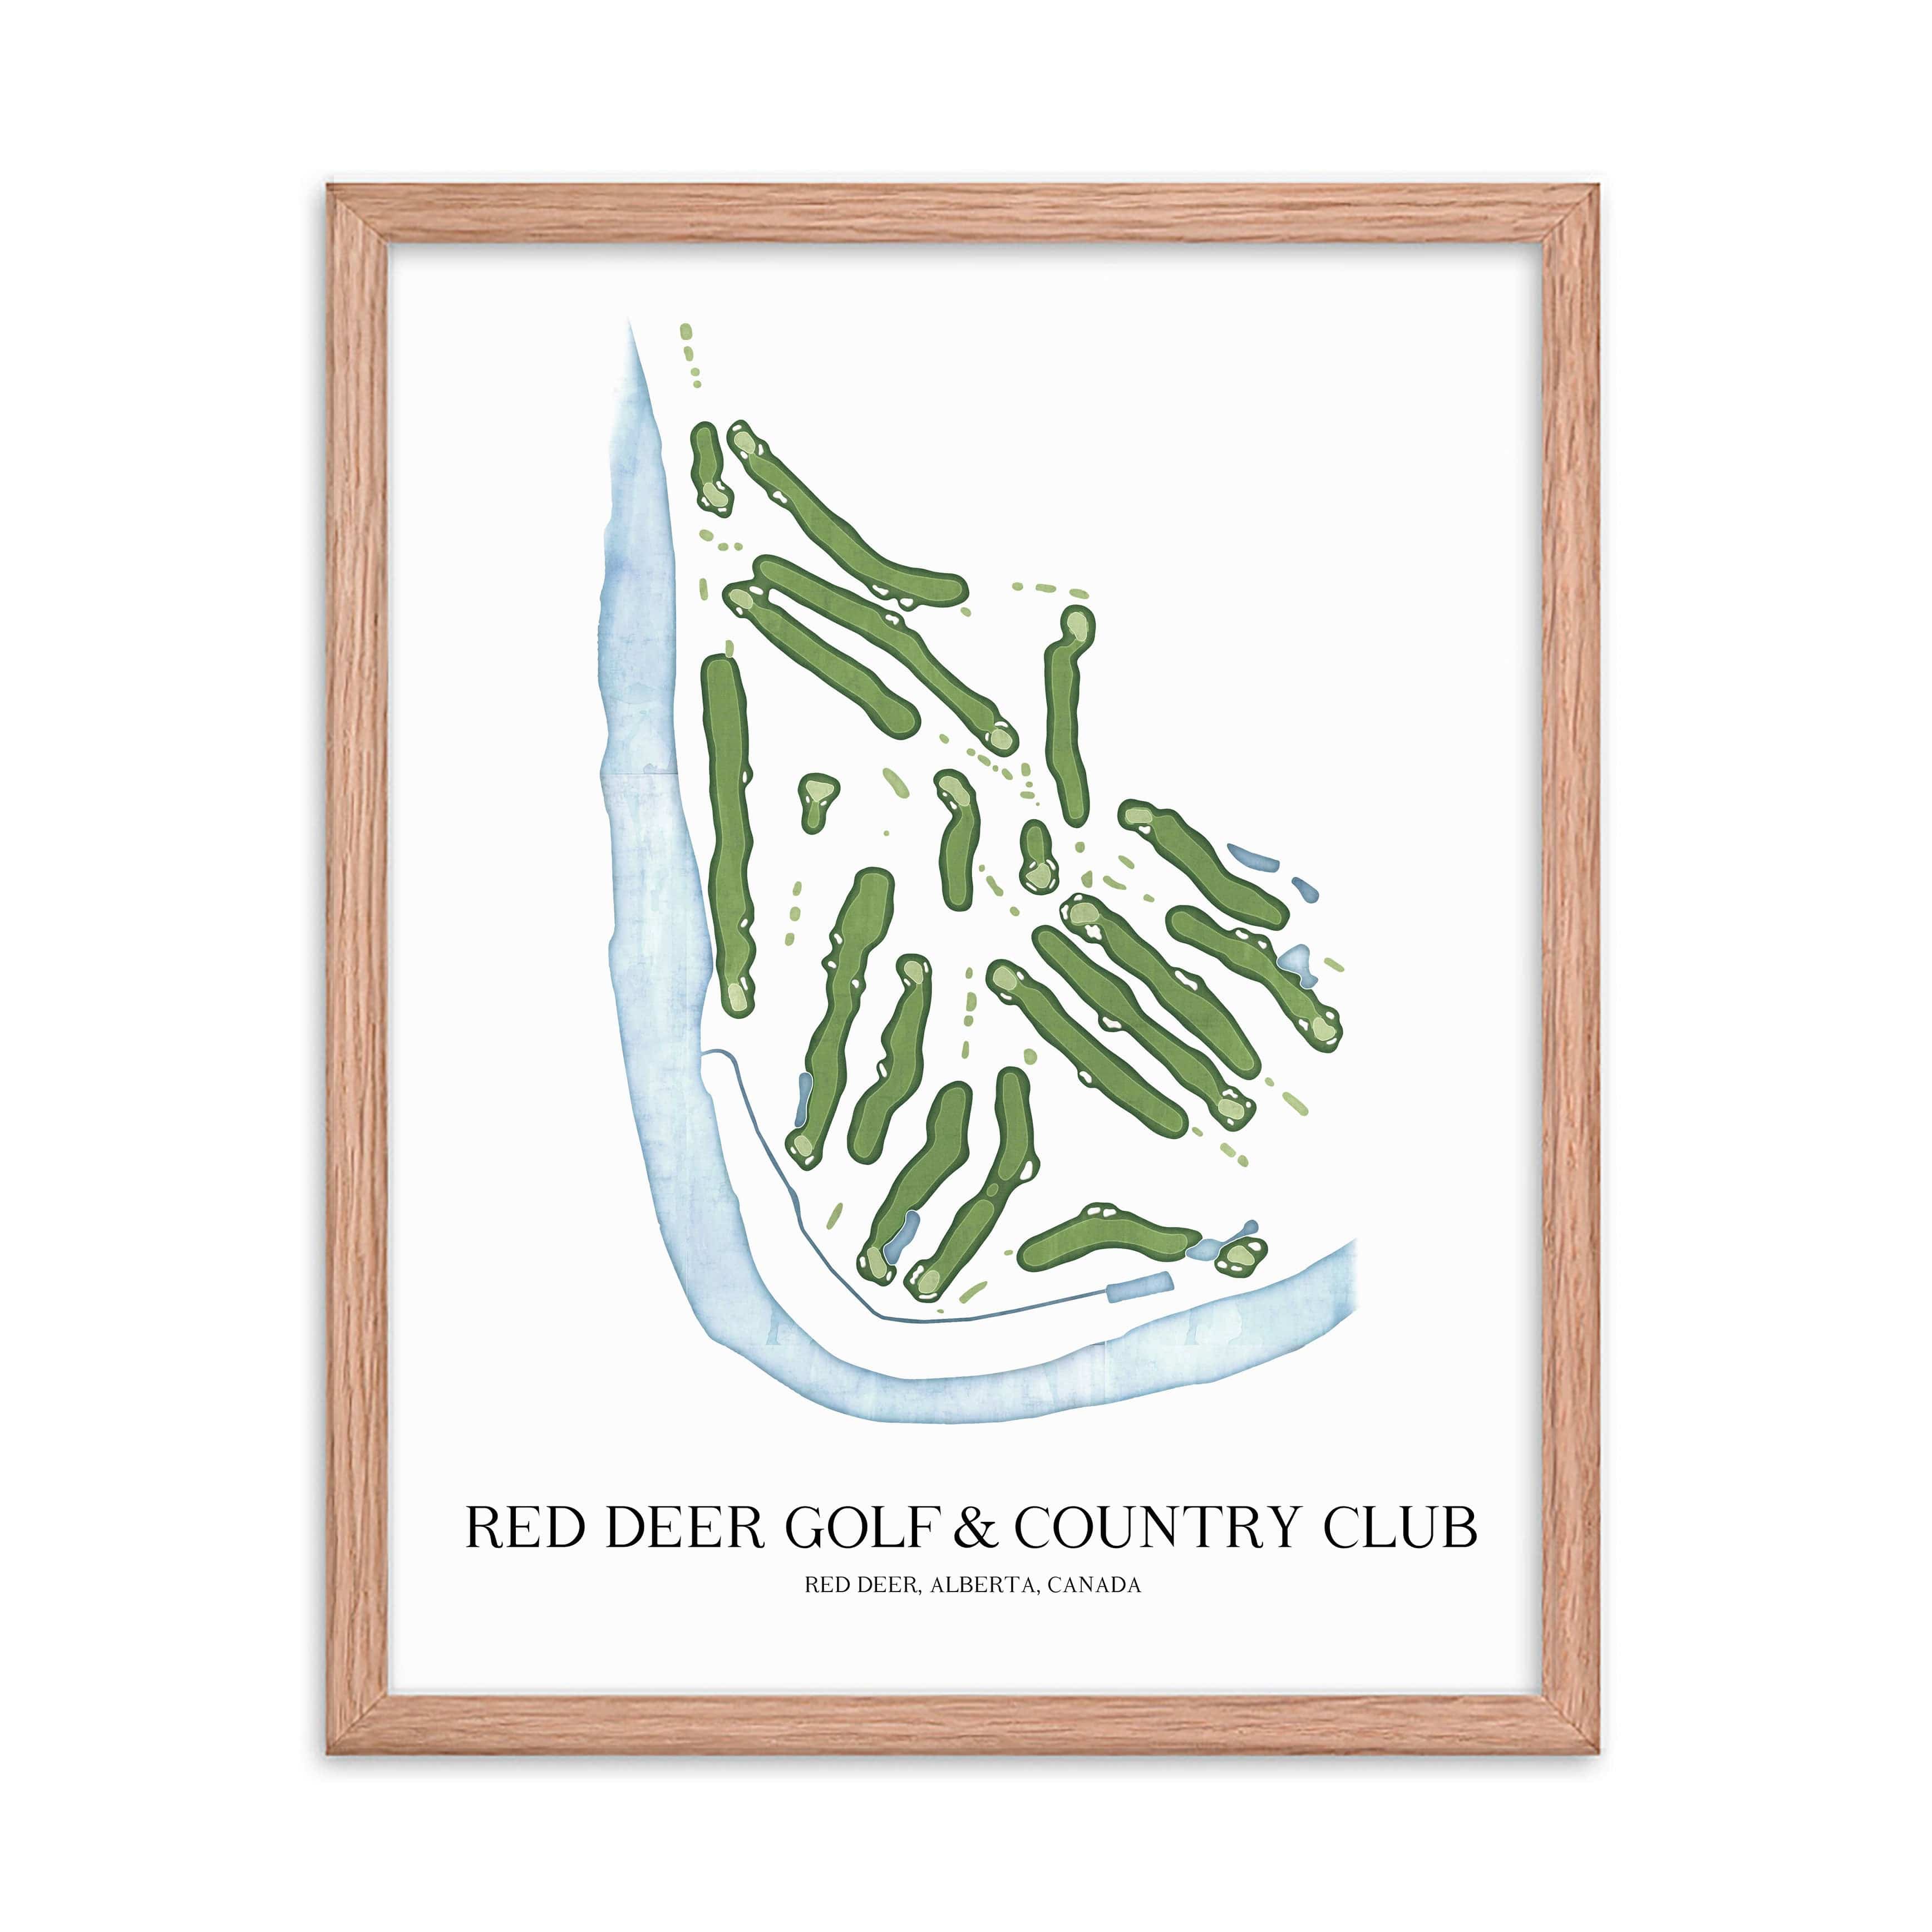 The 19th Hole Golf Shop - Golf Course Prints -  Red Deer Golf & Country Club Golf Course Map